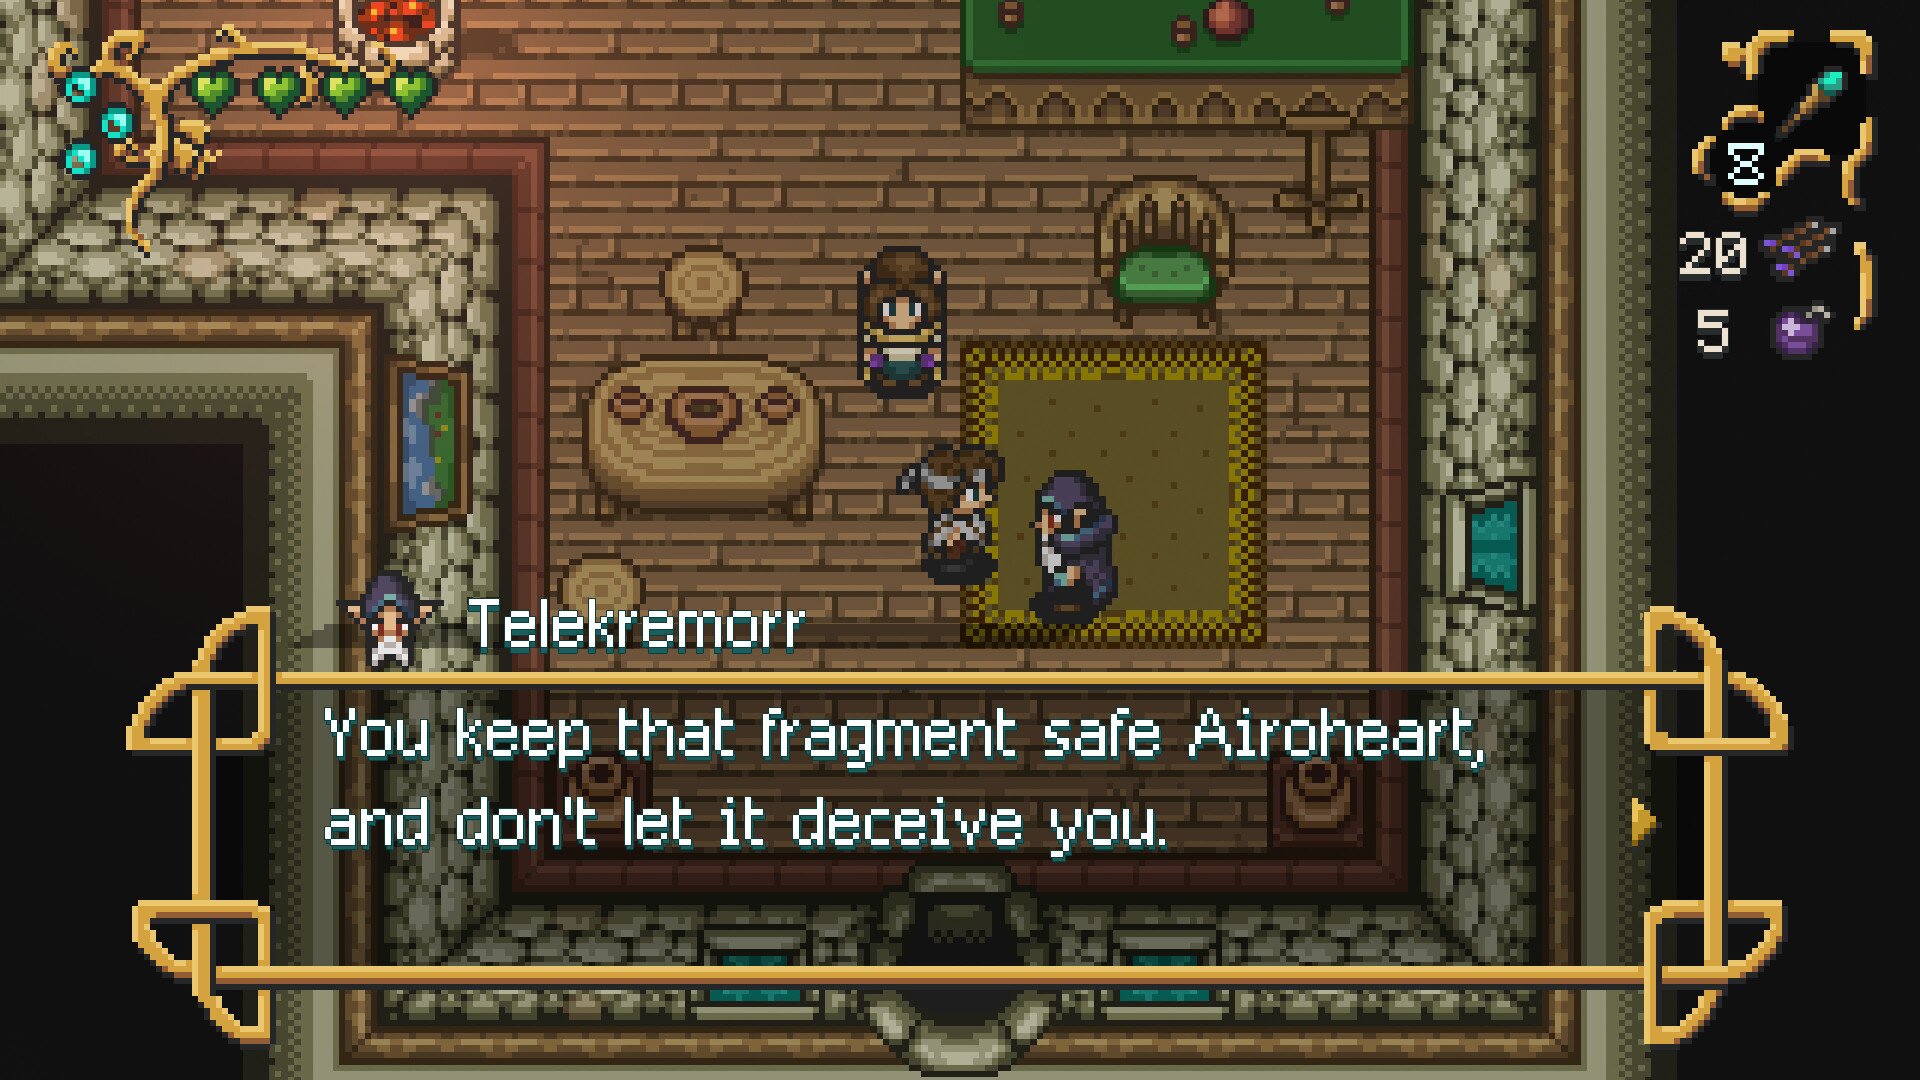 download the new version Airoheart